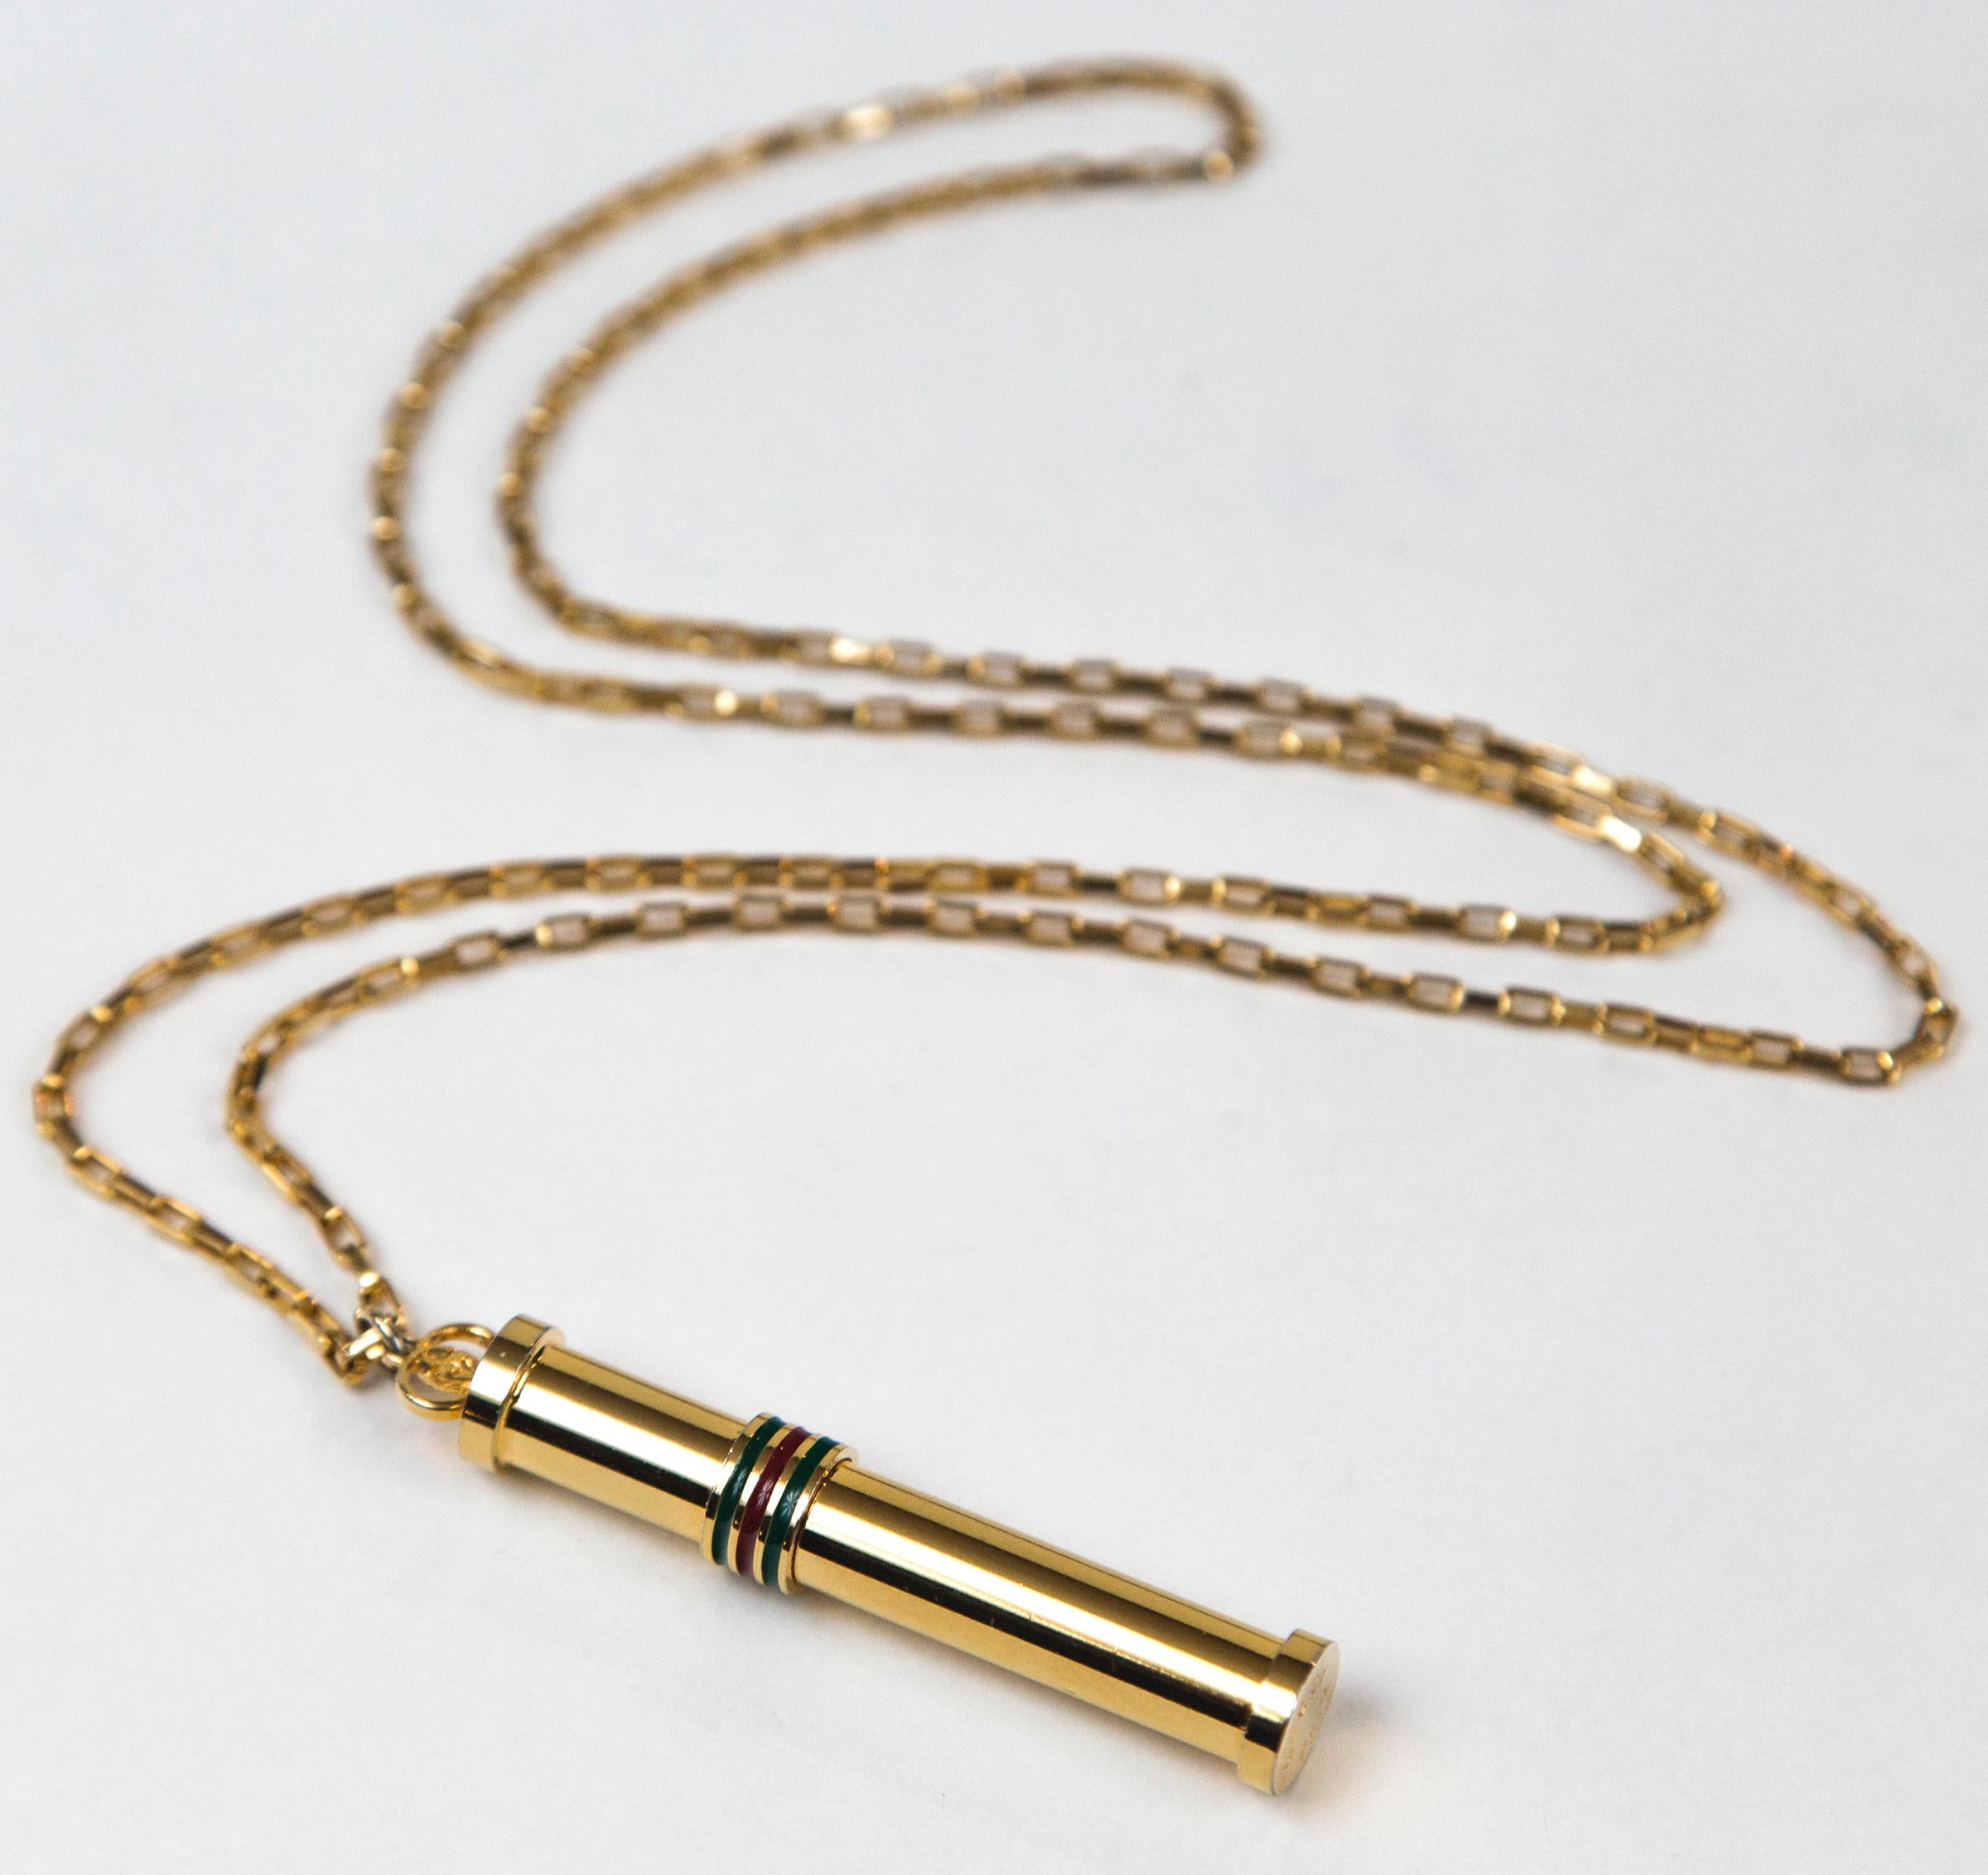 Gucci Gold Perfume Stick Necklace
Chain length: 14.5